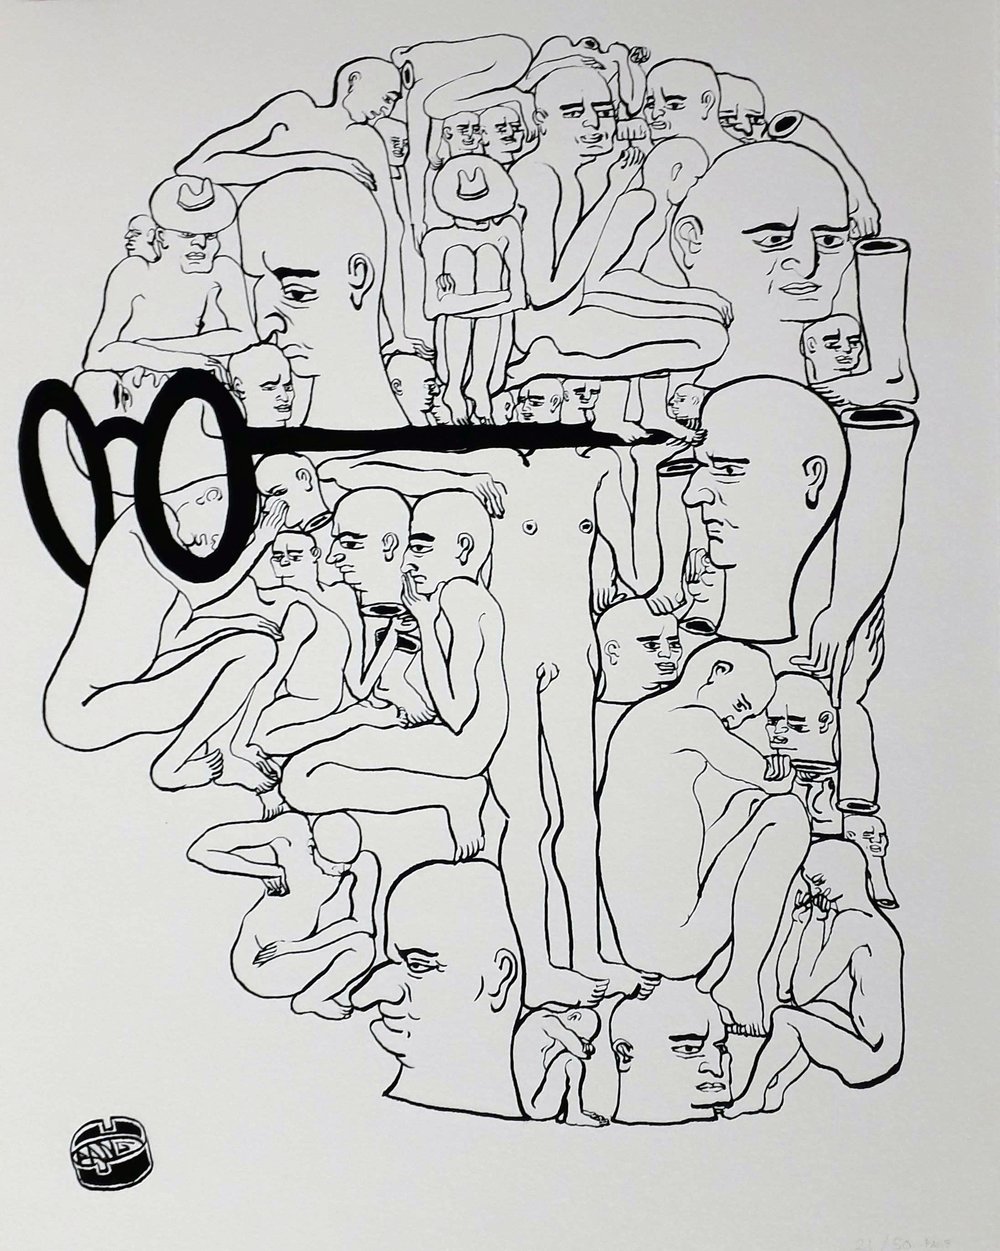 Image of 'WE ARE ALL OF US ONE' by Pang